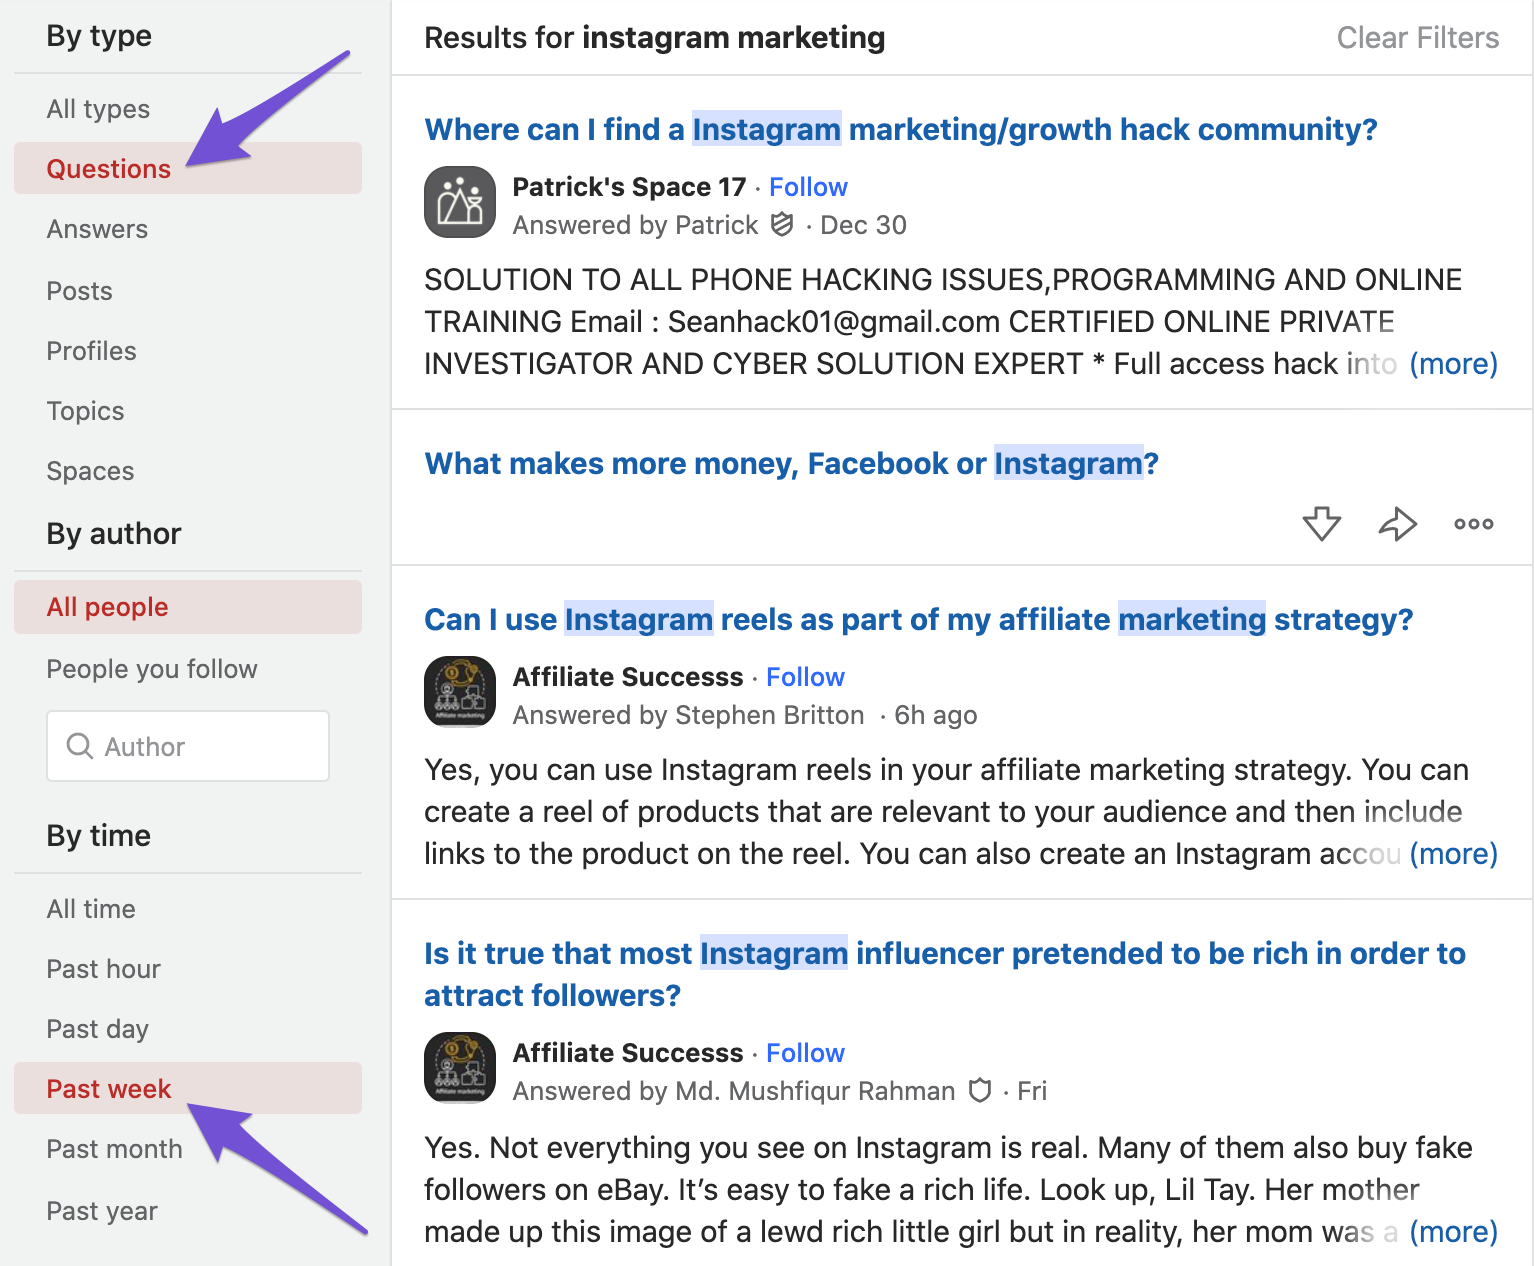 quora search results using filters by question and past week with keyword term instagram marketing